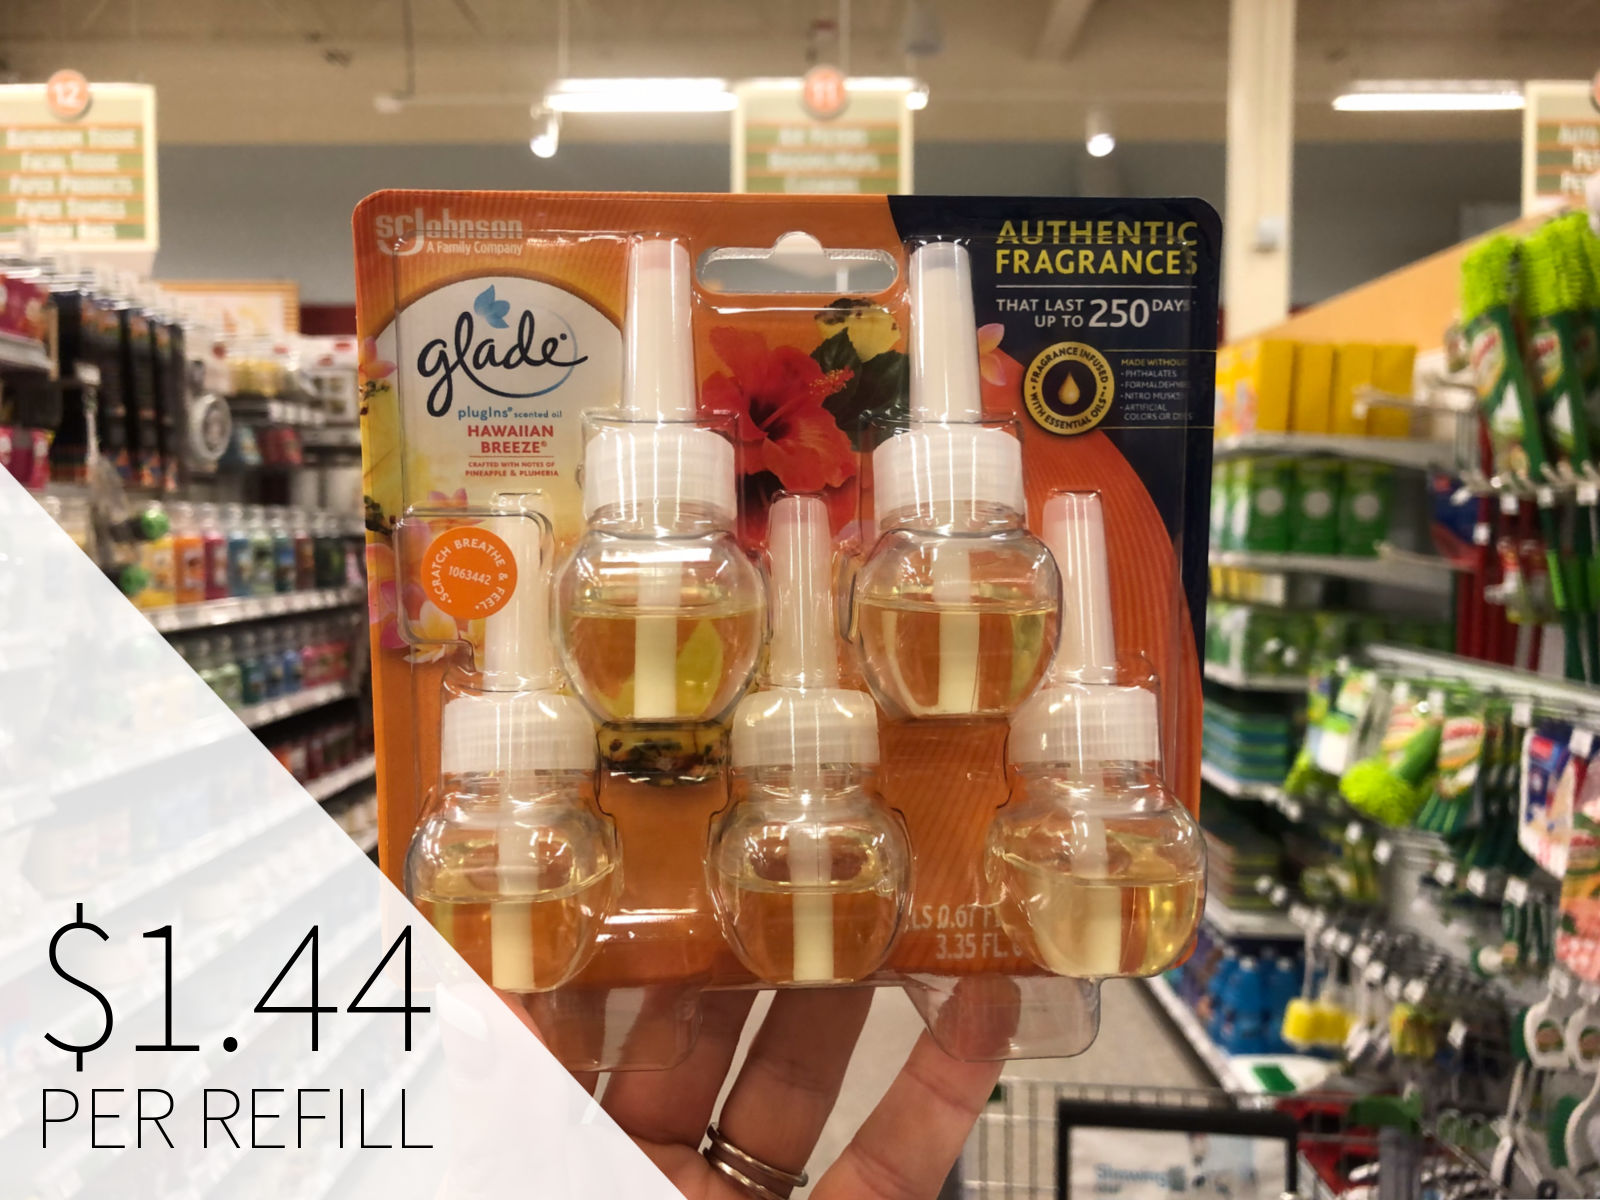 Look For Glade® Limited Edition Fall Collection Products At Publix + Get Fantastic Savings On Glade® PlugIns® Scented Oil Refills + on I Heart Publix